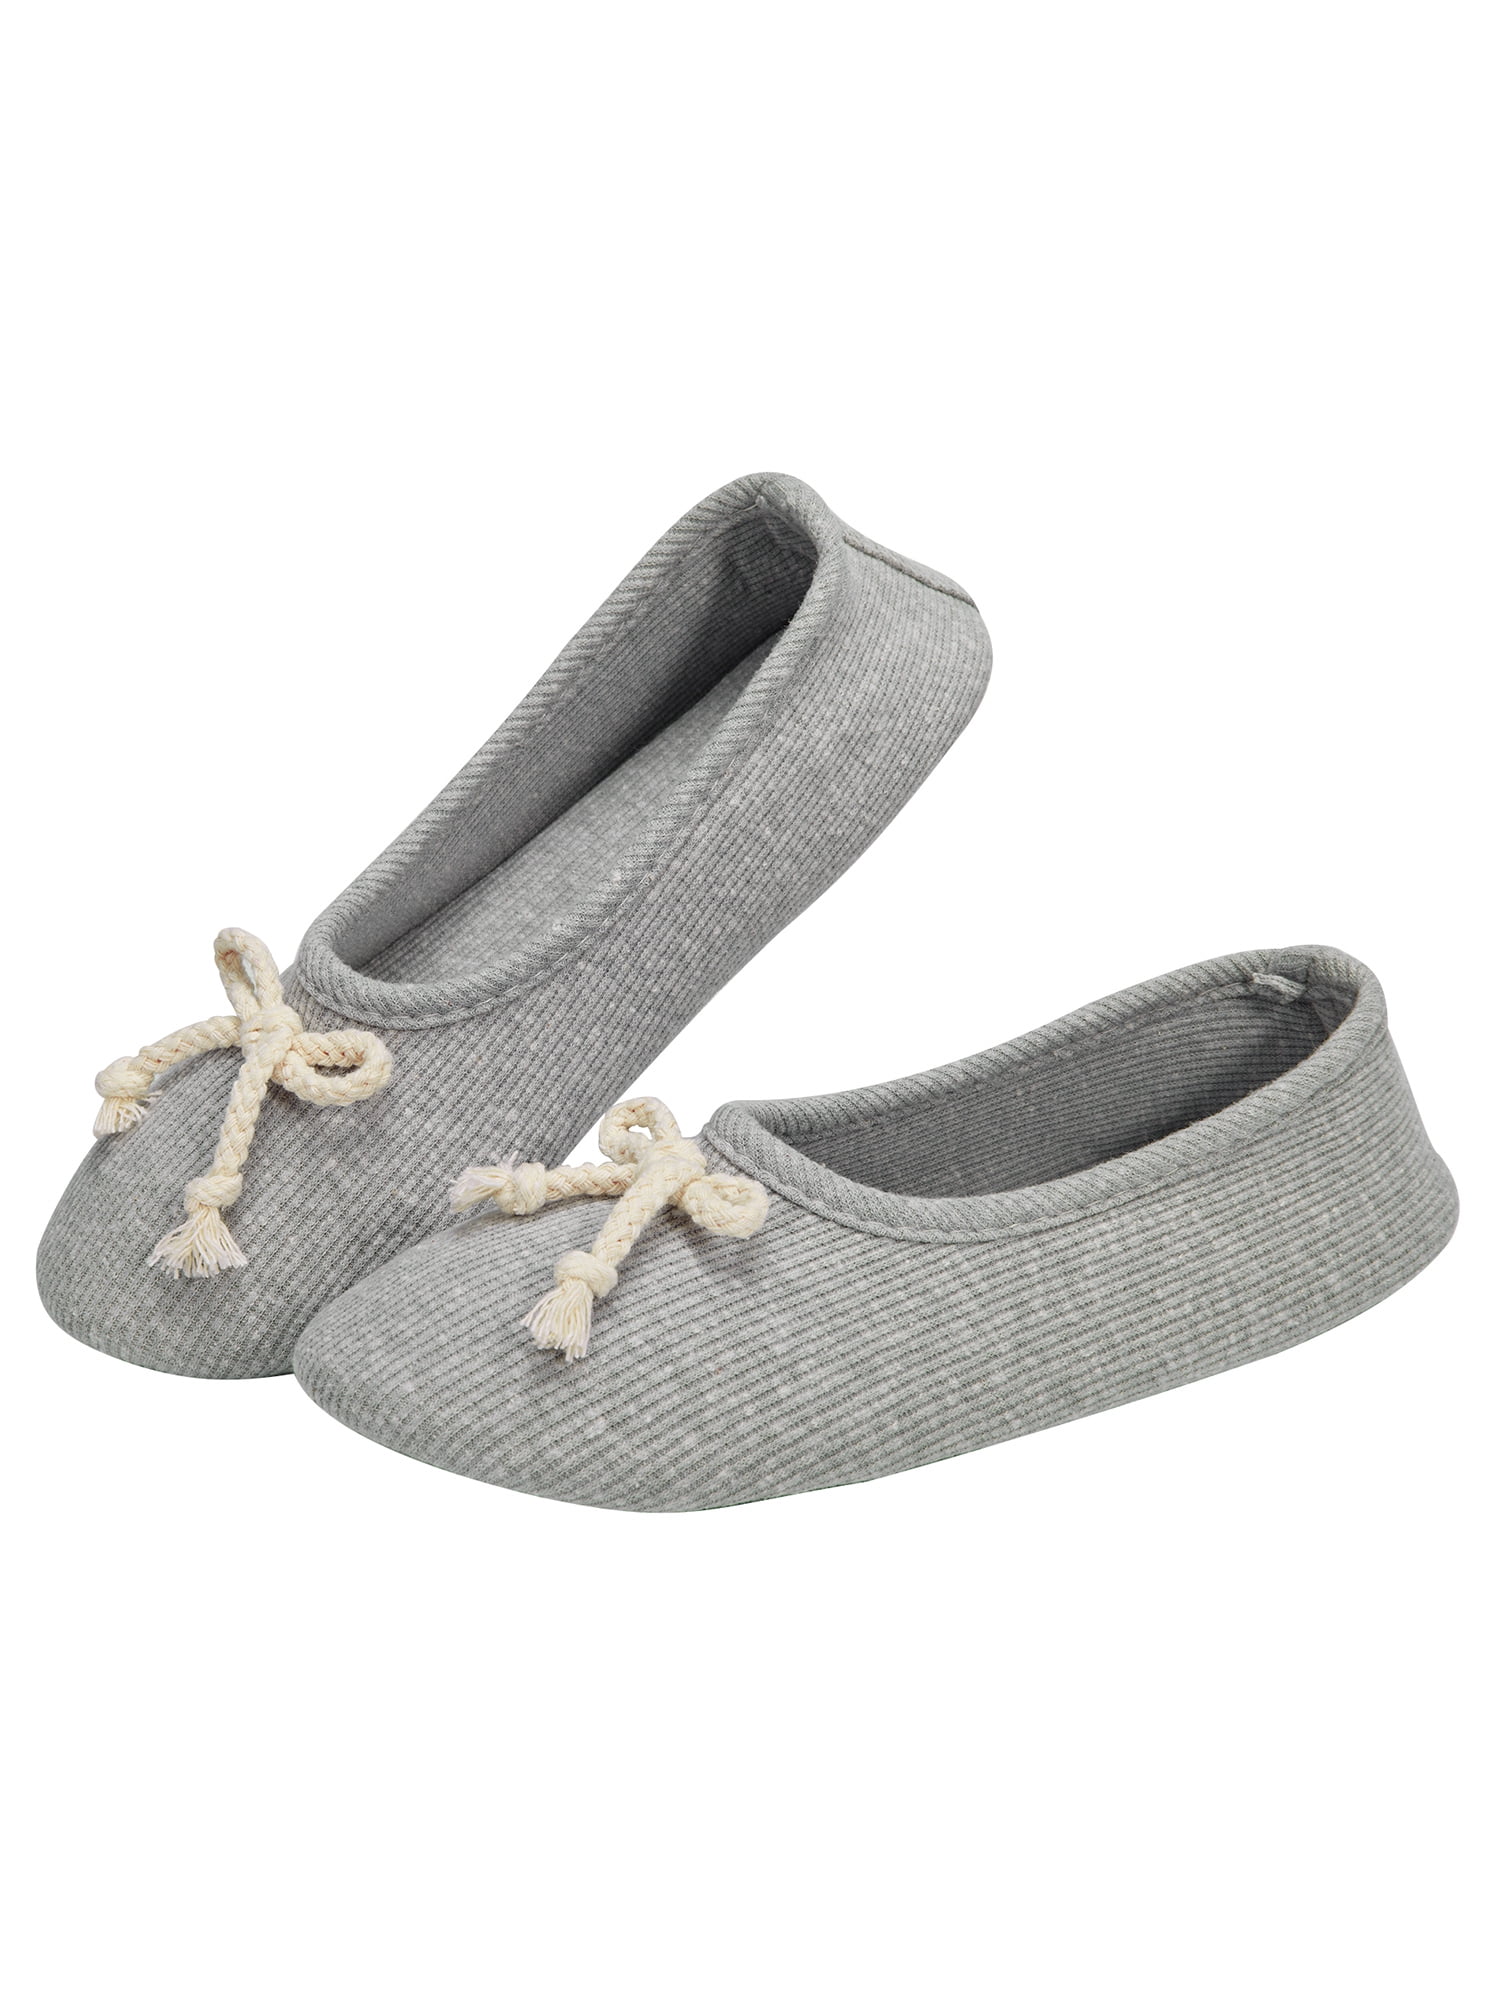 Ladies Comfy Cotton Knit Memory Foam Ballerina Slippers Light Weight Terry Cloth House Shoes w/Stretchable Heel 